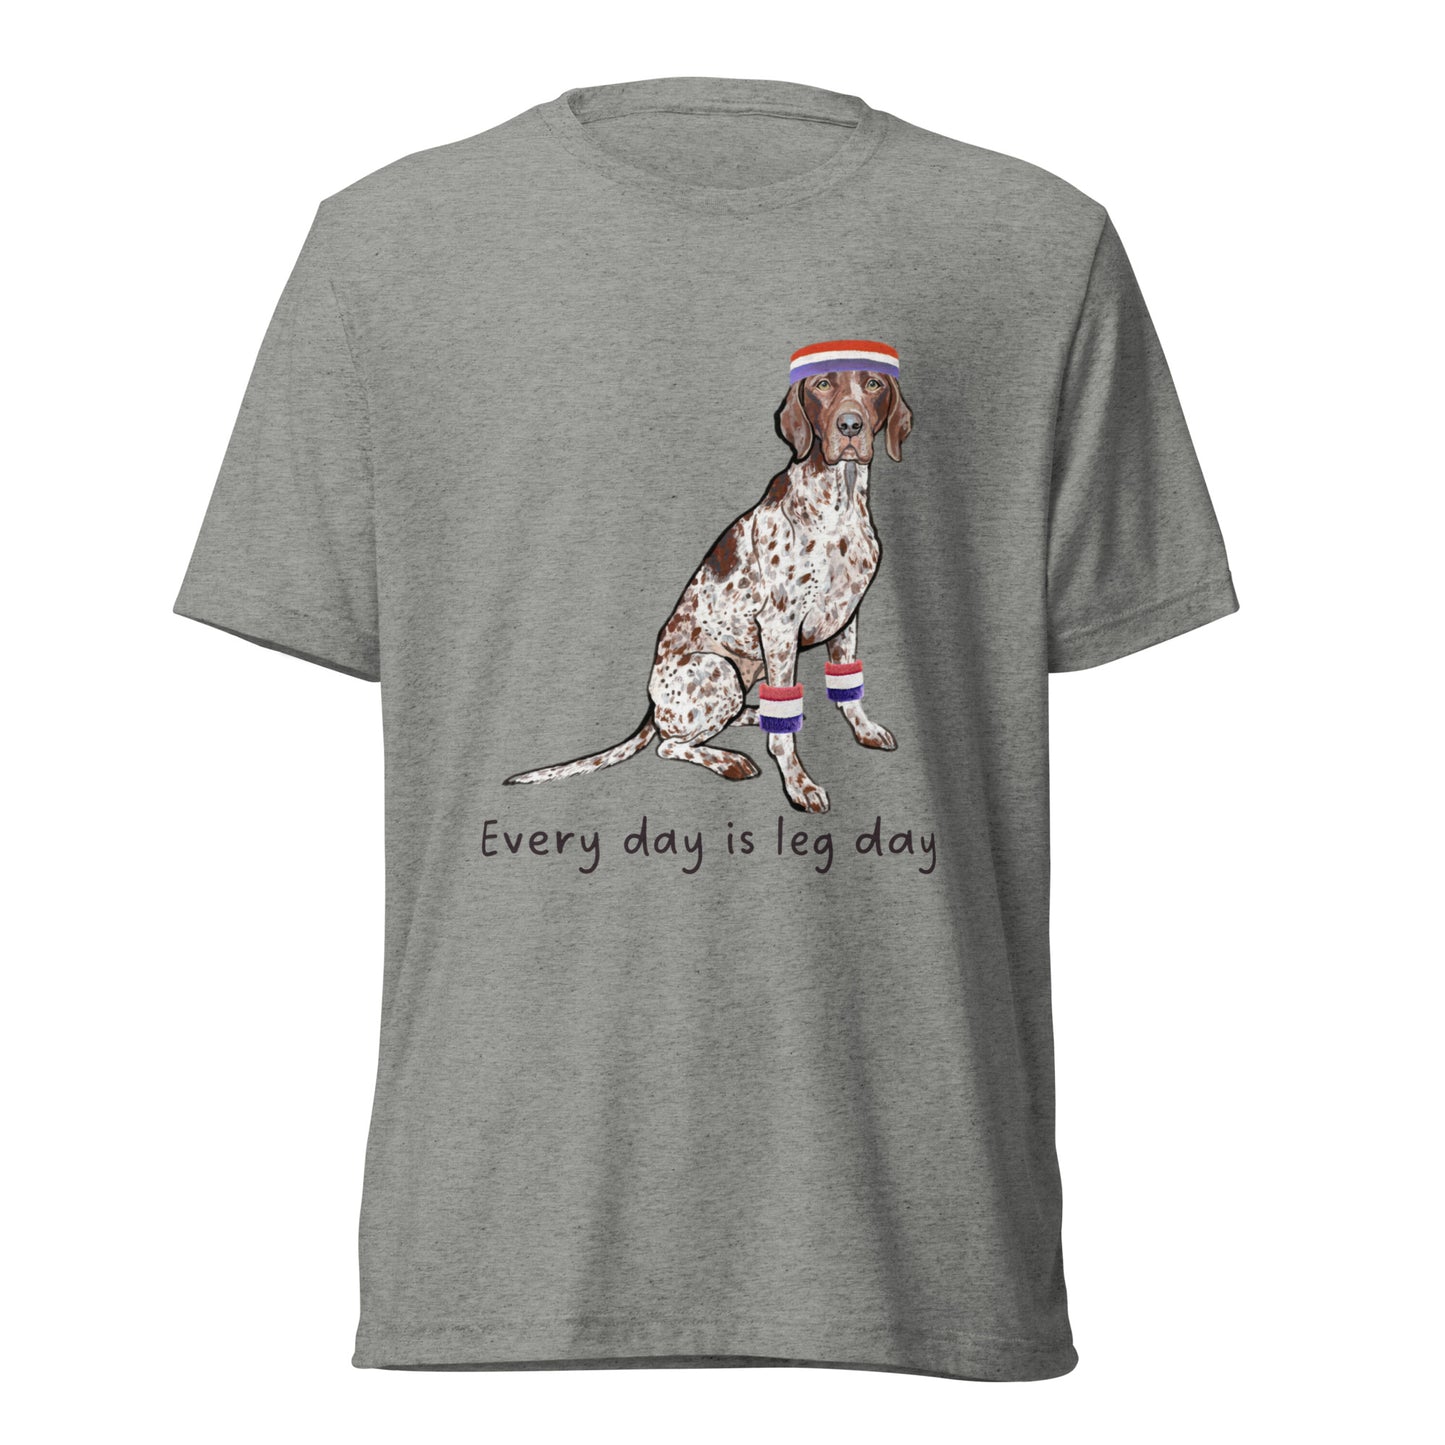 Every day is leg day Short sleeve t-shirt